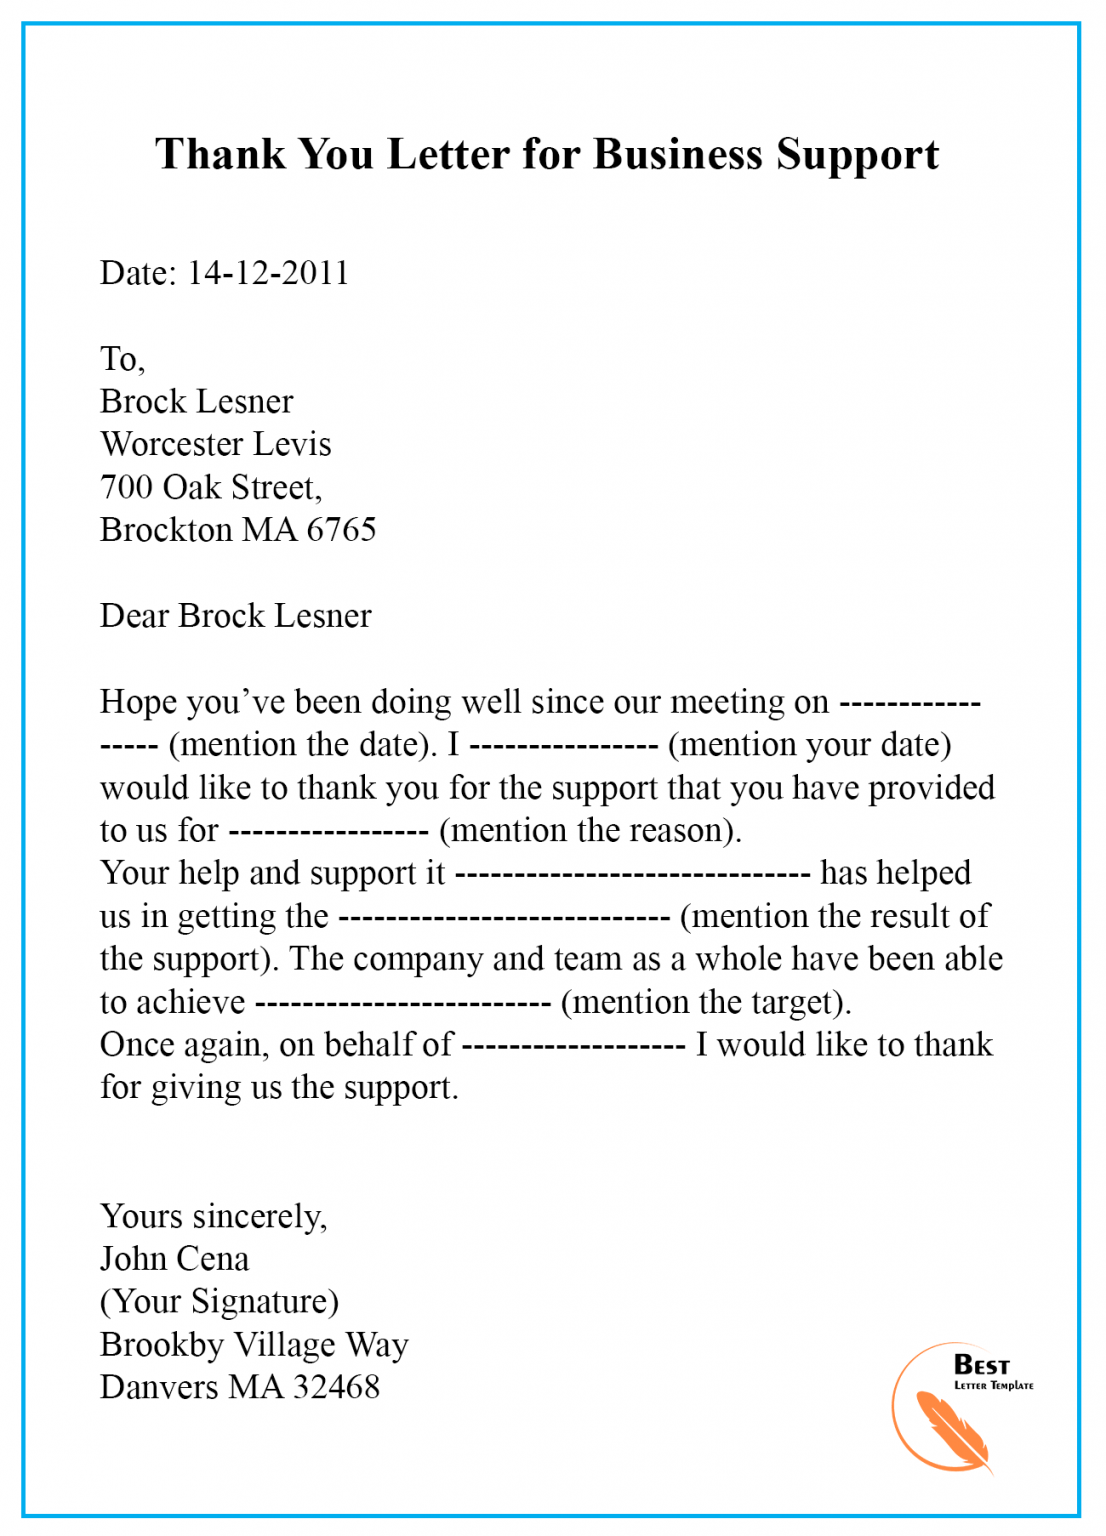 Thank You Letter Template for Support - Sample & Examples